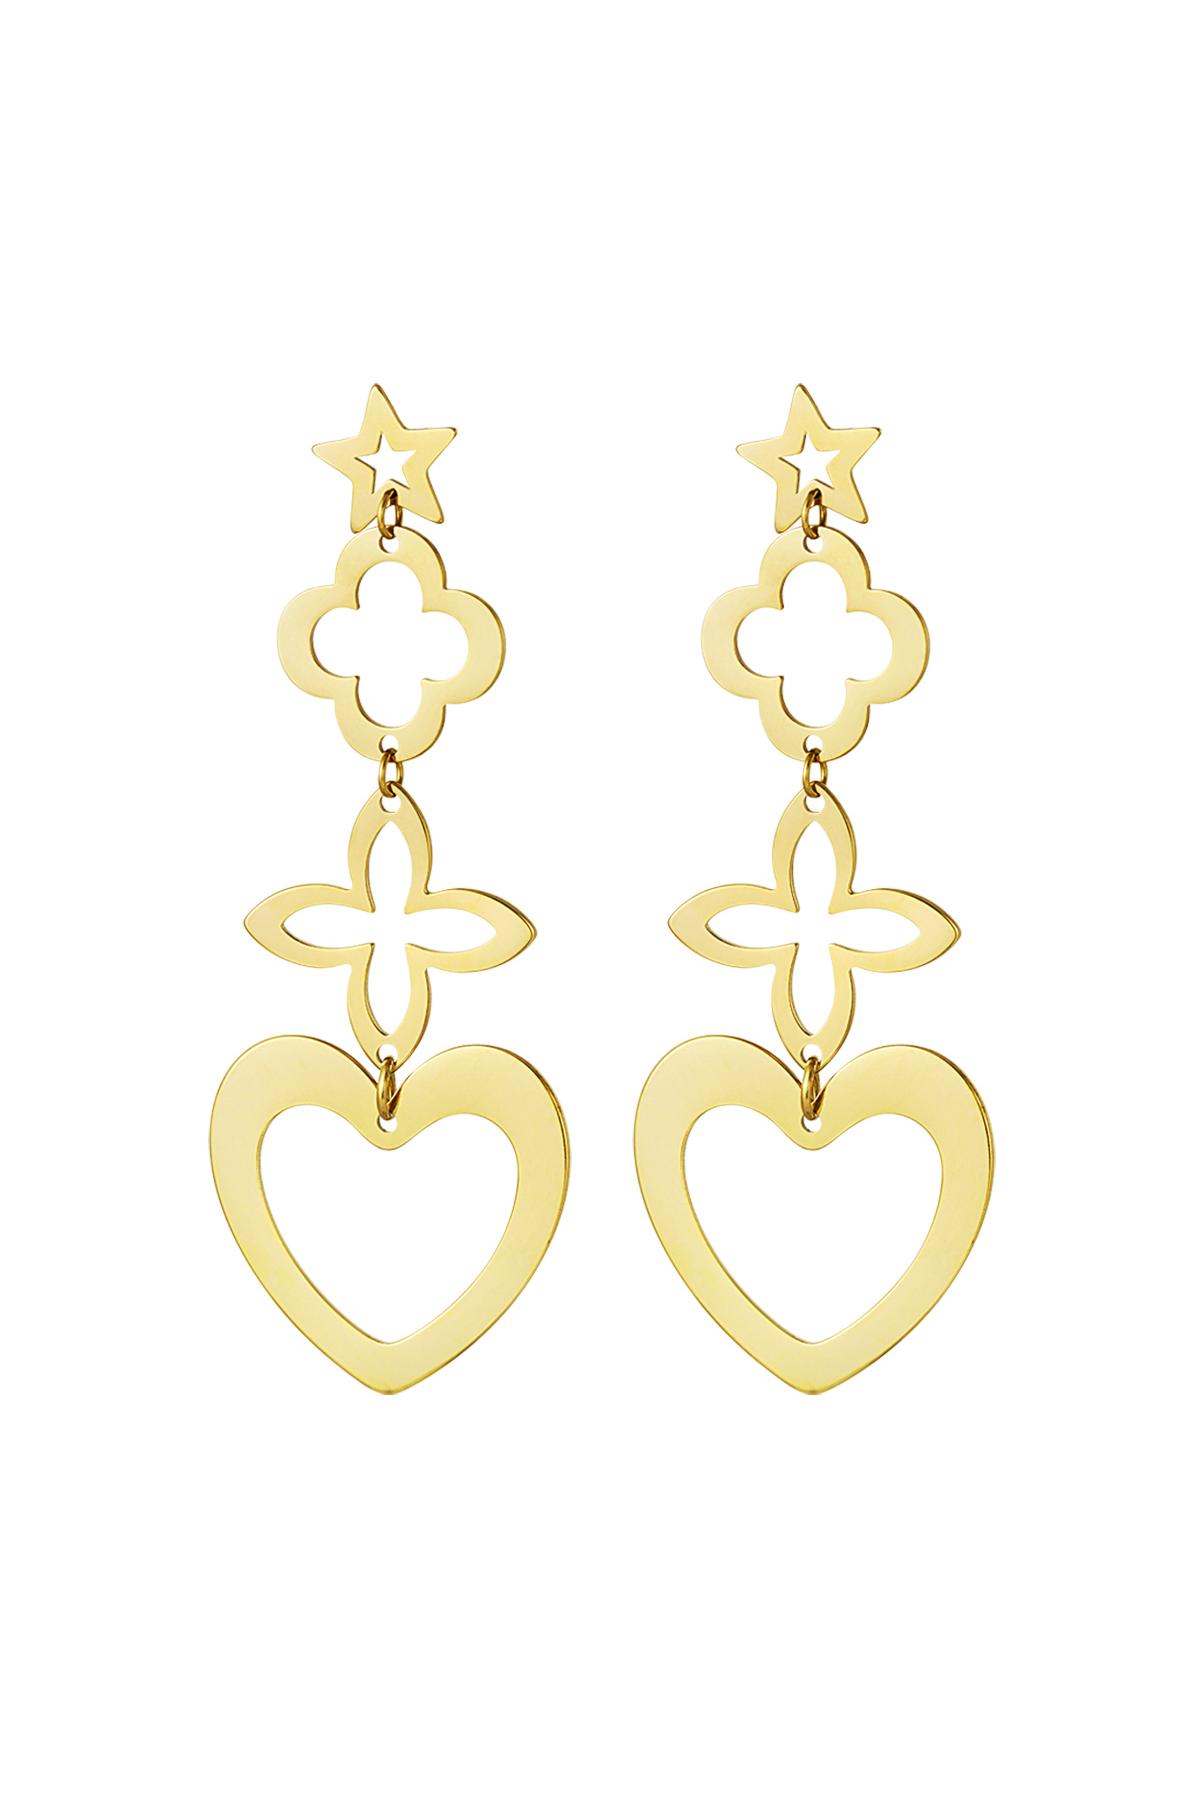 Statement earrings charms Gold Stainless Steel